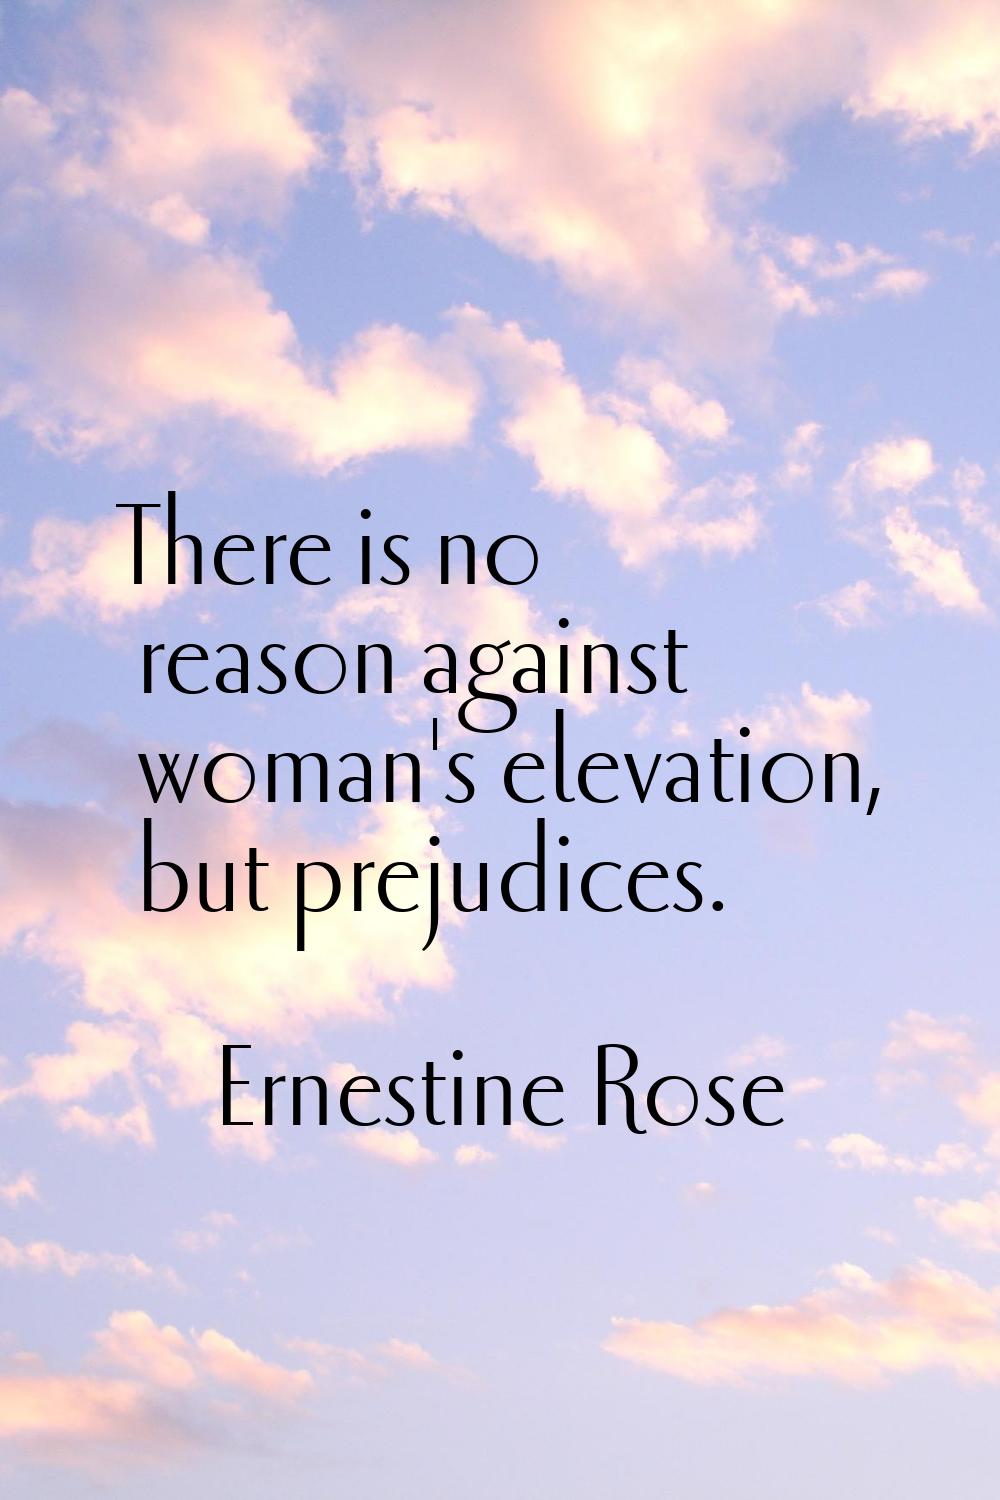 There is no reason against woman's elevation, but prejudices.